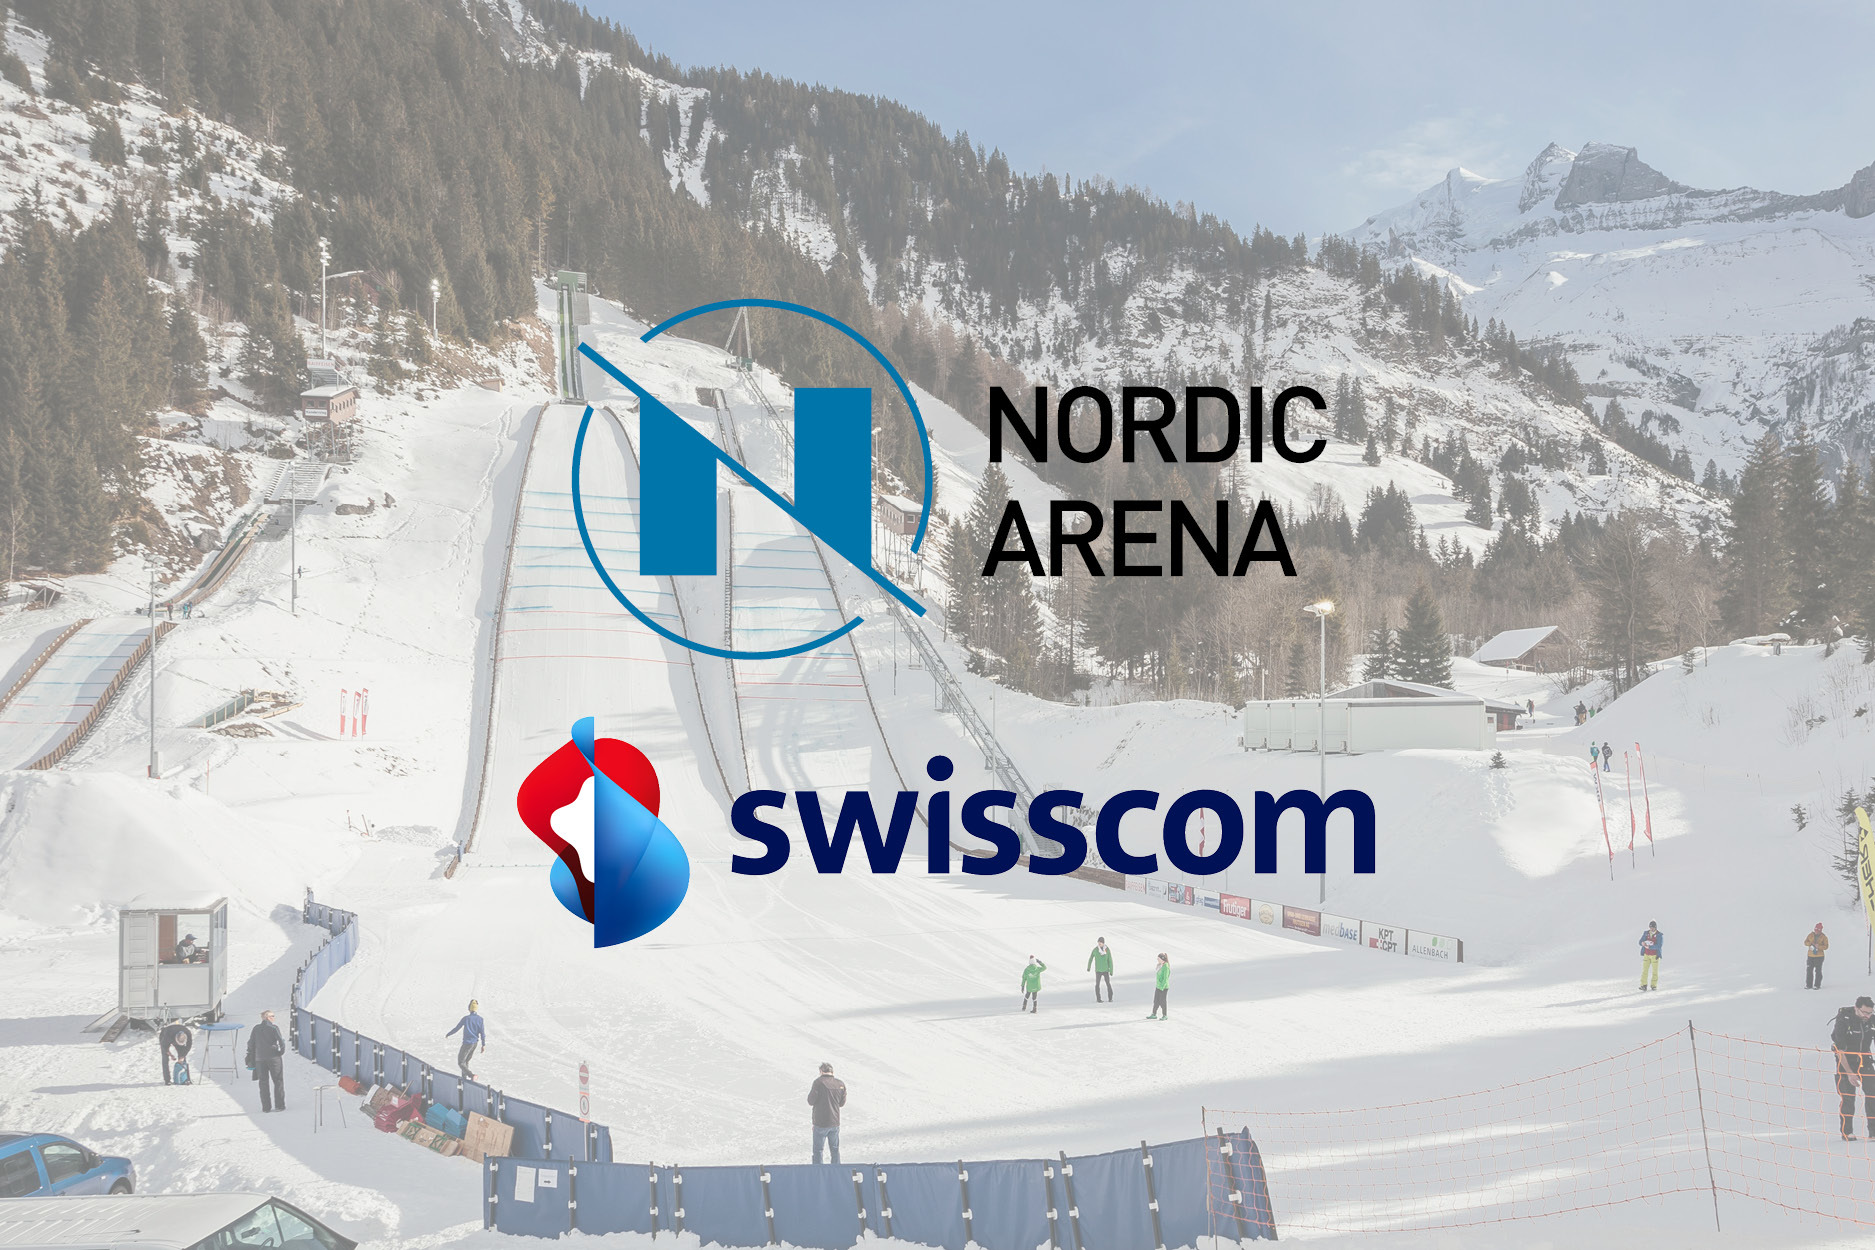 Press release : New partner for the Nordic Arena